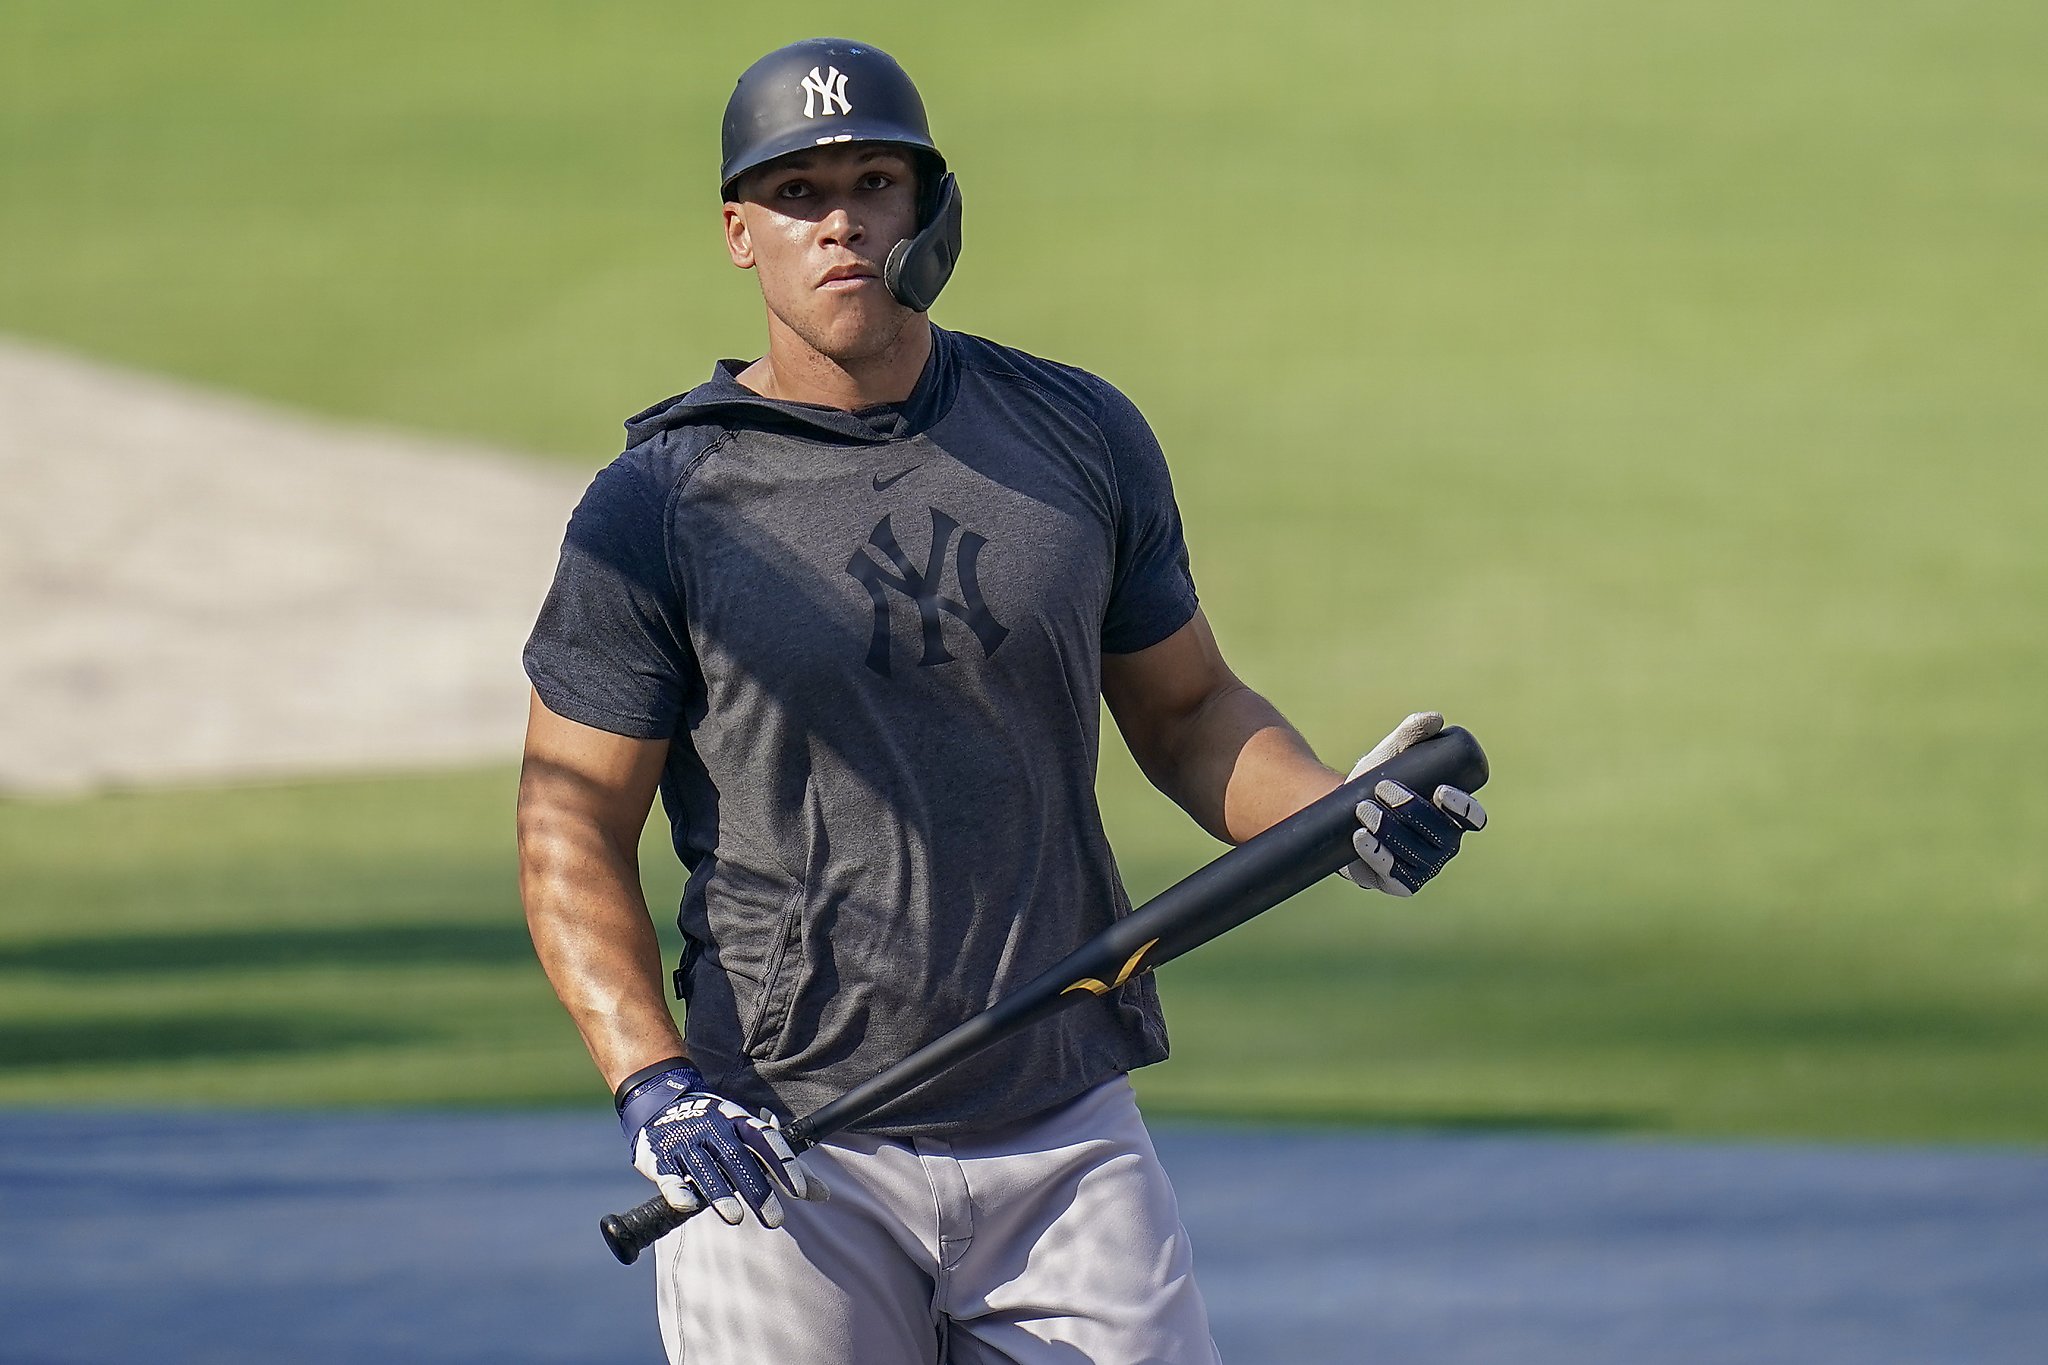 E-40 makes recruiting pitch for Aaron Judge to come to Giants